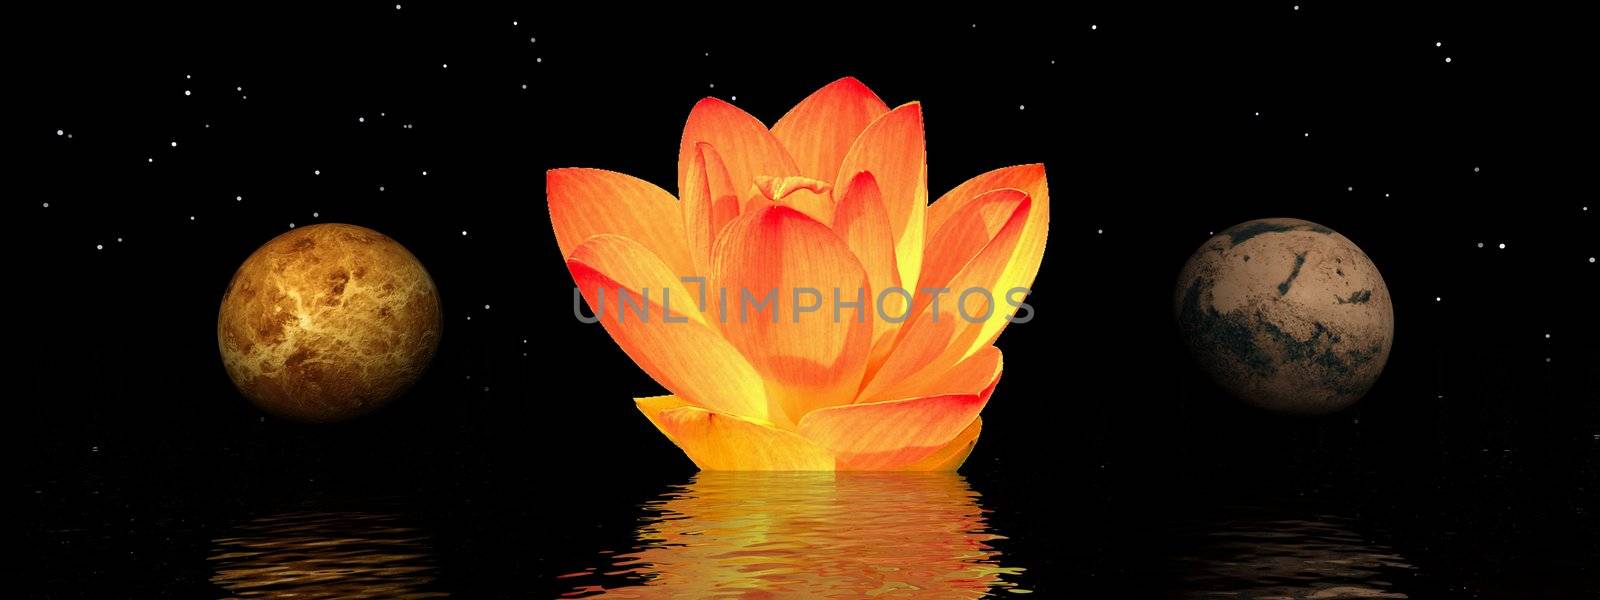 water lily and planets by mariephotos